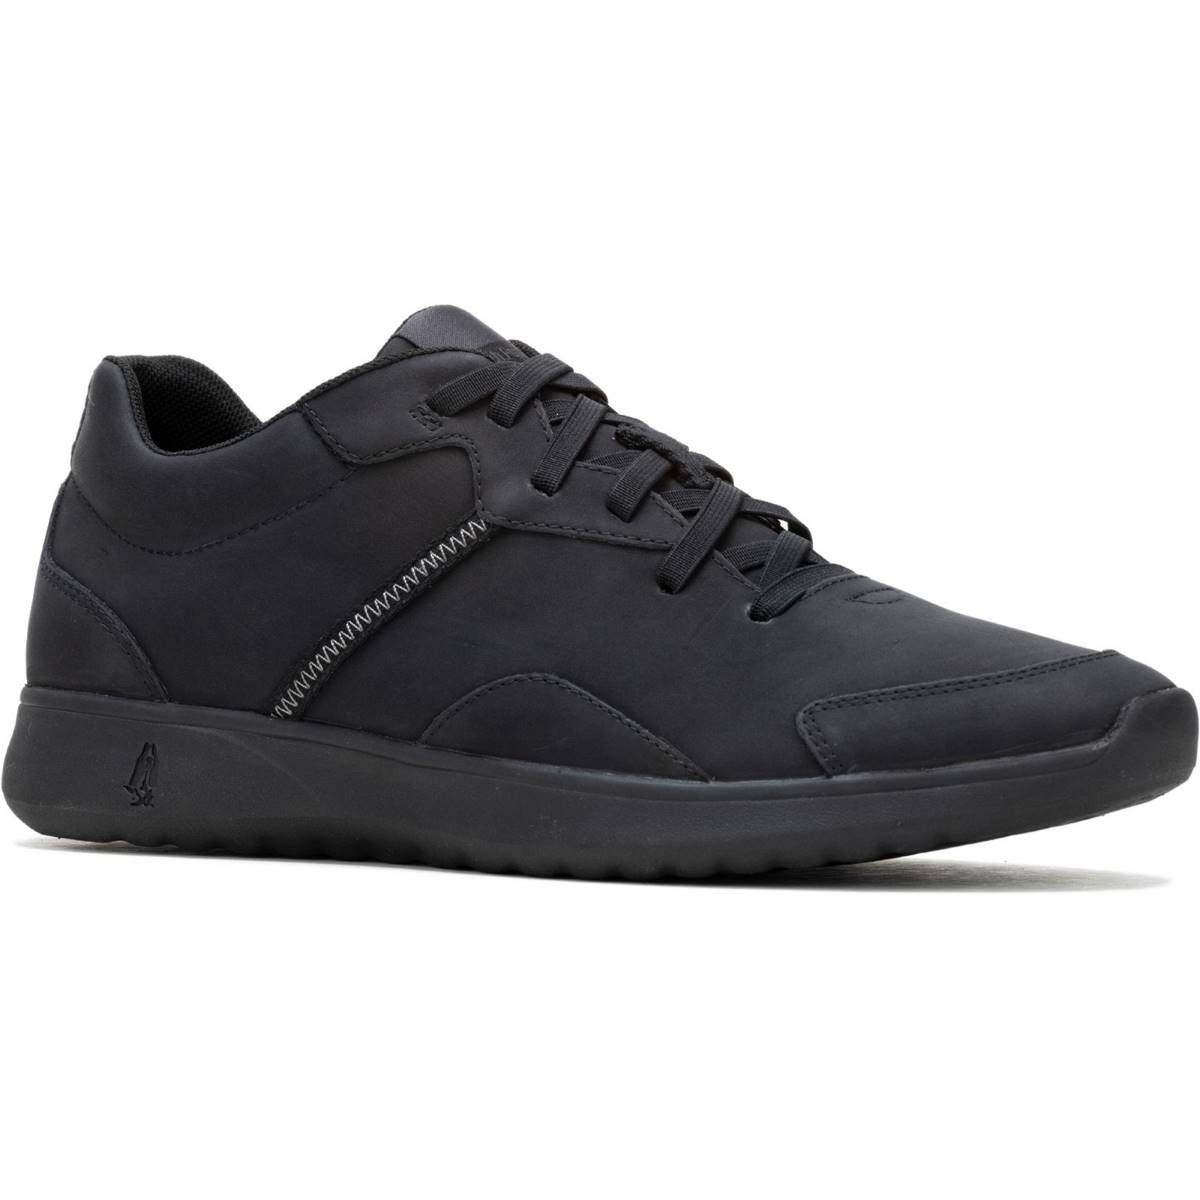 Hush Puppies The Good Trainer Black Mens trainers HPM10360 in a Plain Leather and Man-made in Size 7